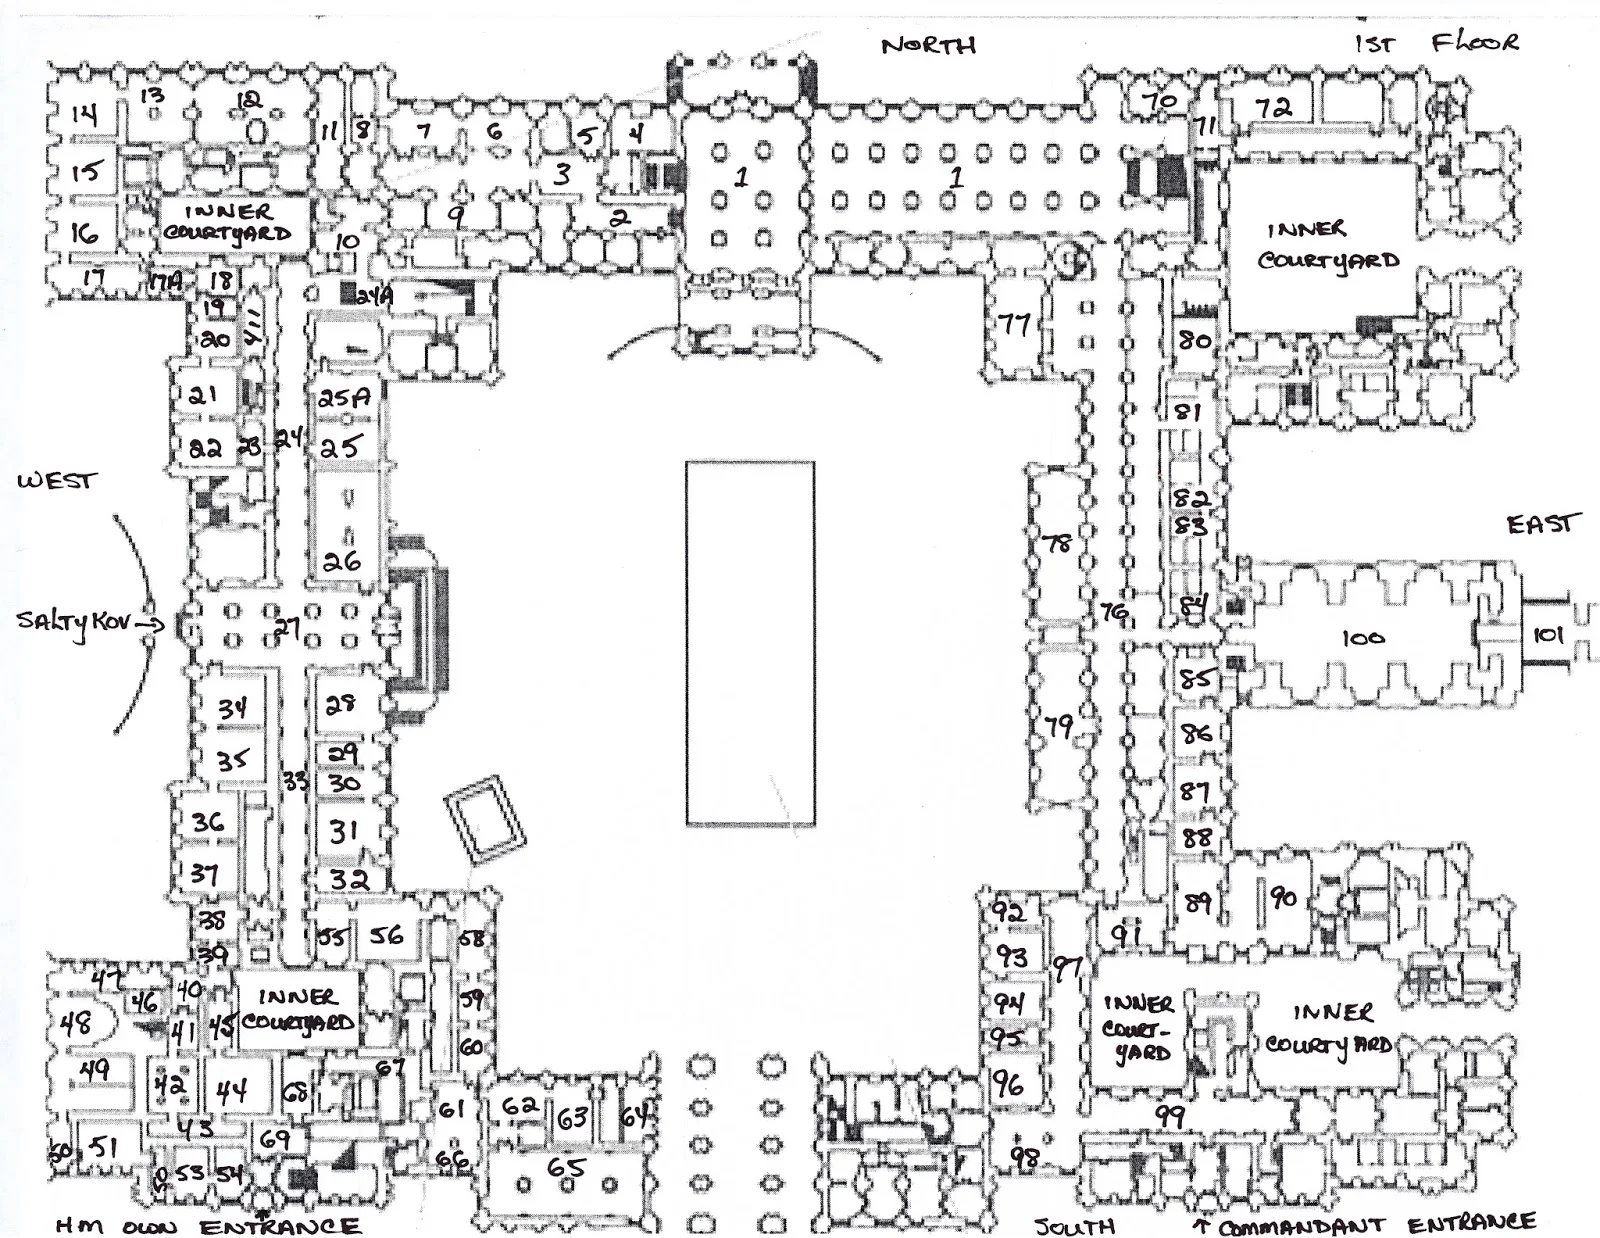 Winter Palace Research : Plan u0026 List of the 1st Floor of the 